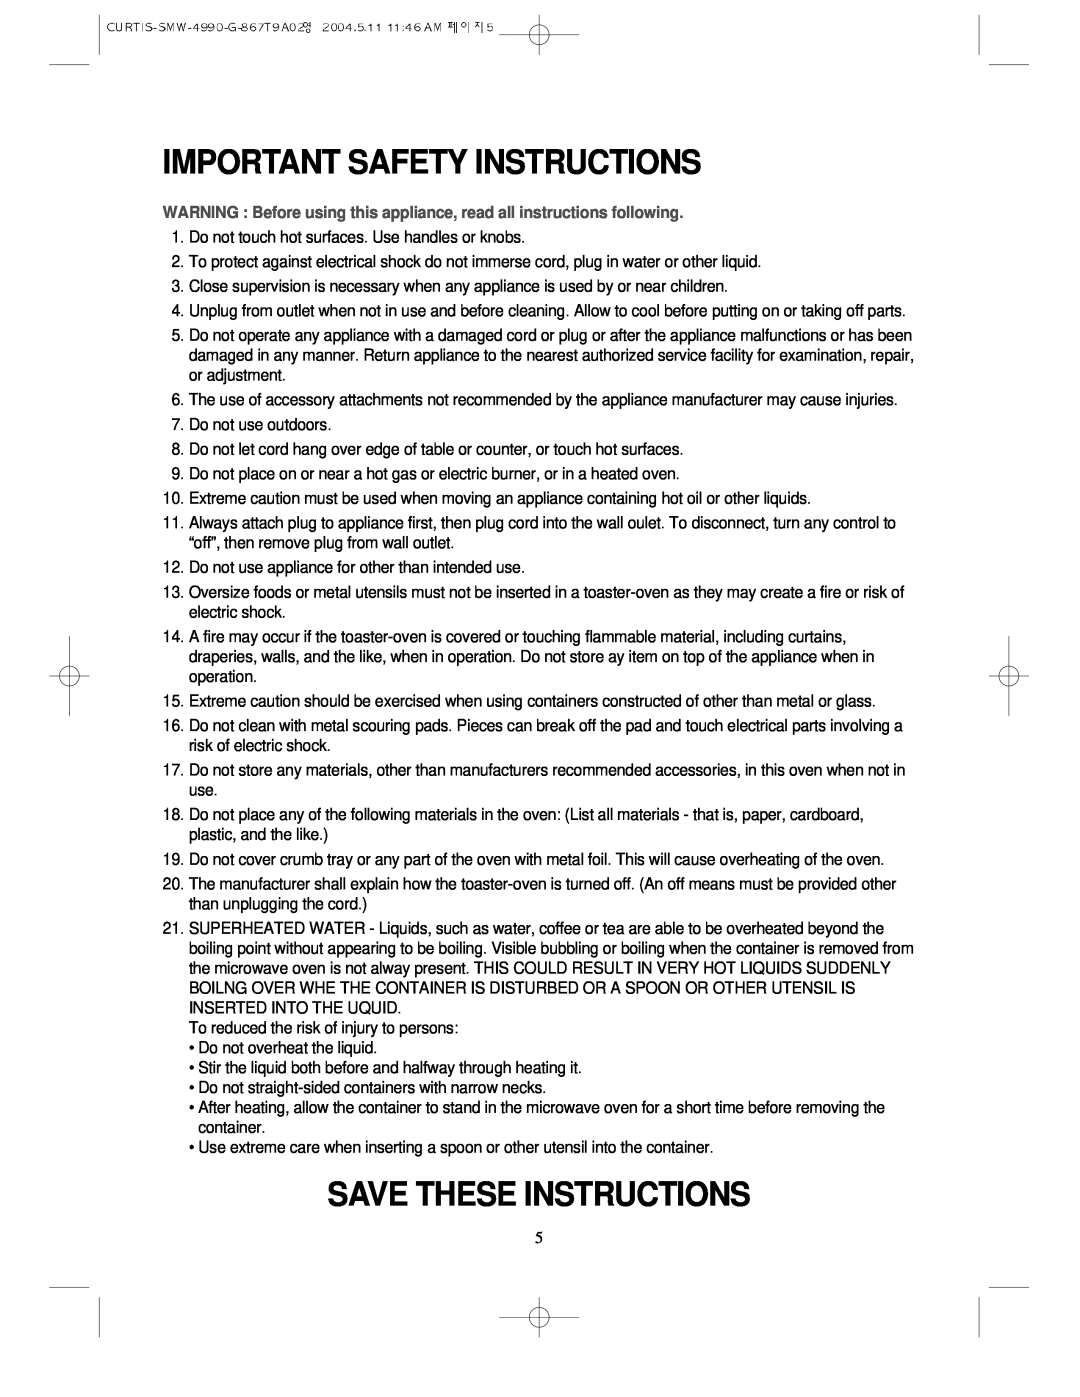 Sunbeam SMW-4990 manual Important Safety Instructions, Save These Instructions 